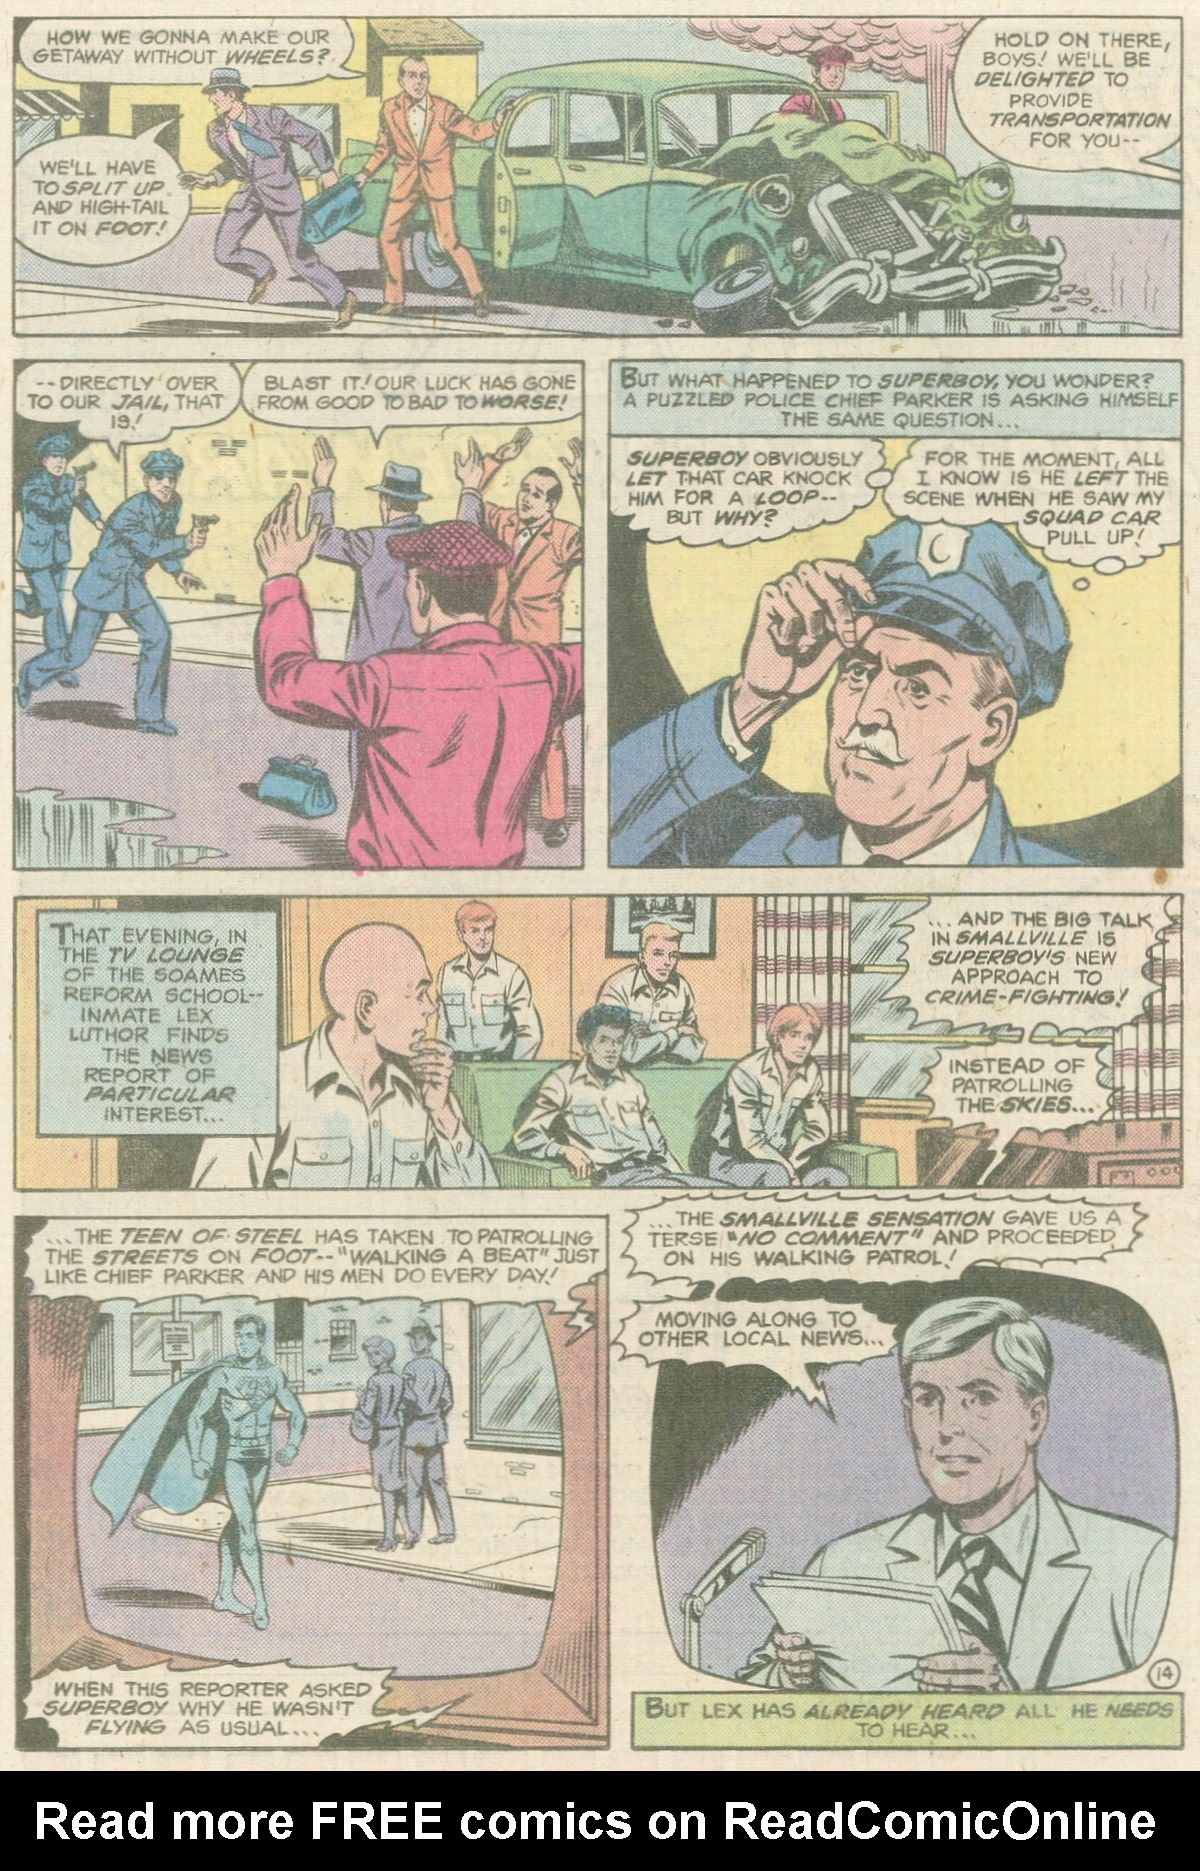 The New Adventures of Superboy 14 Page 14